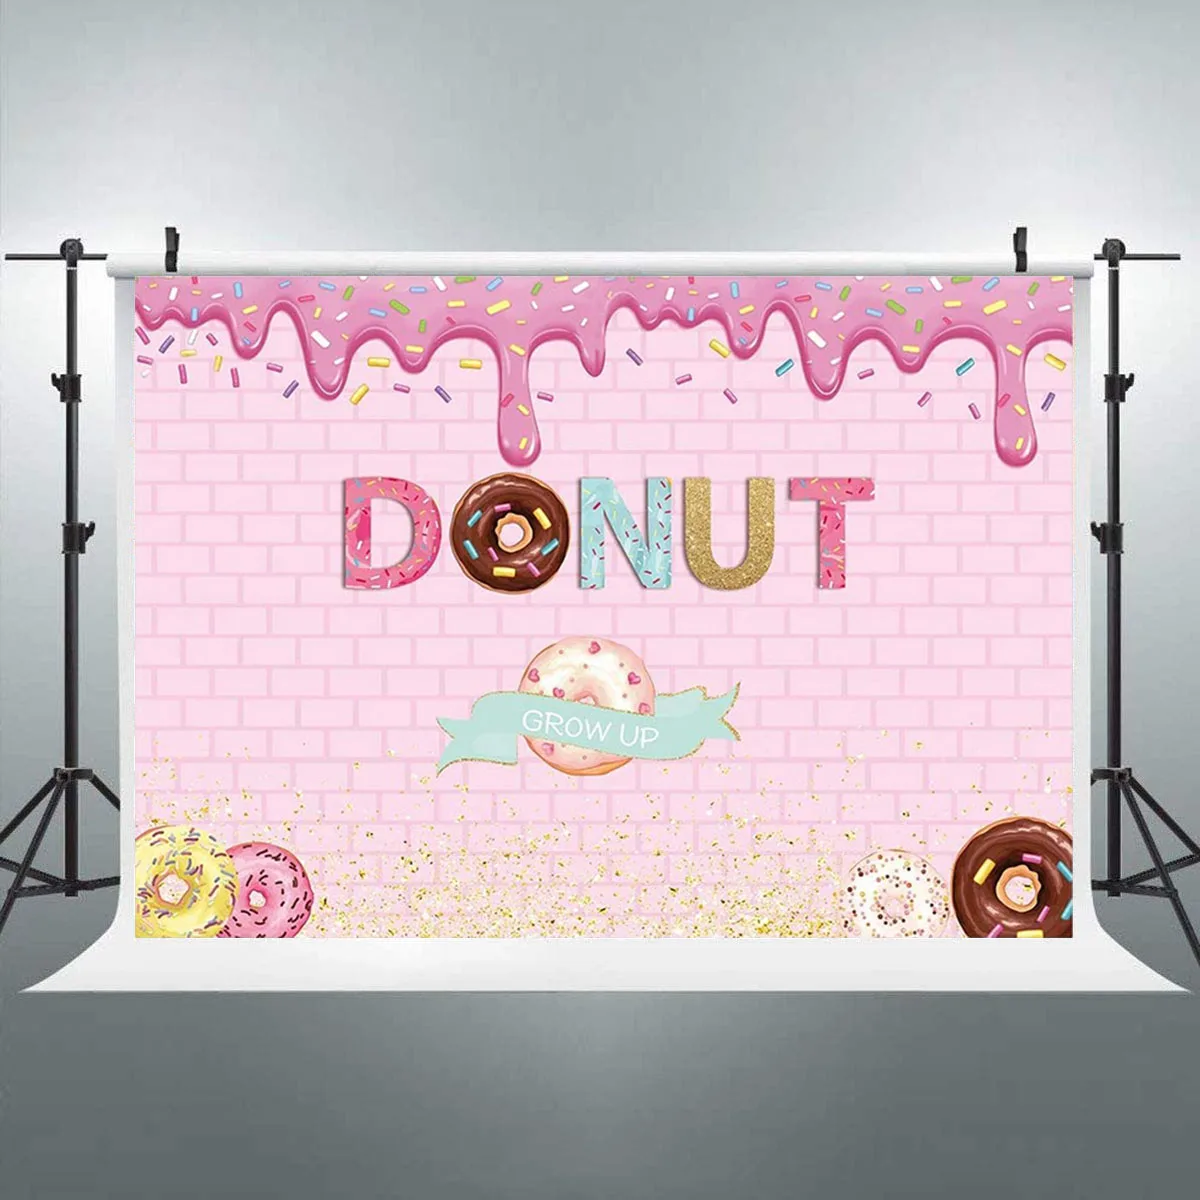 

Customized Donut Grow Up Backdrop for Birthday Party Pink Girl Baby Shower Photography Colorful Sprinkle Confetti Table Banner